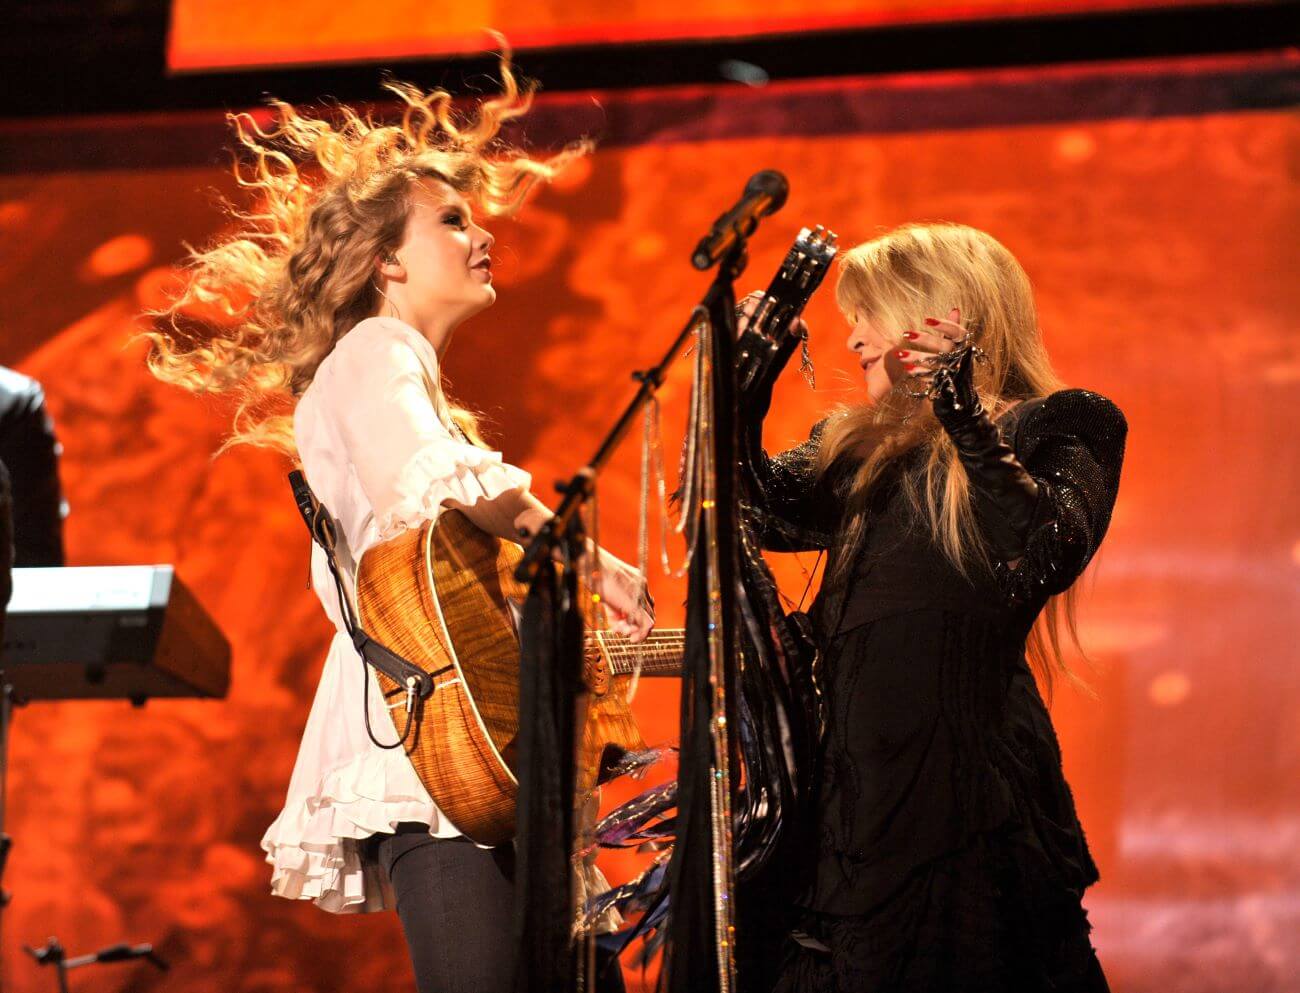 Taylor Swift plays guitar and stands on stage with Stevie Nicks, who has a tambourine. 